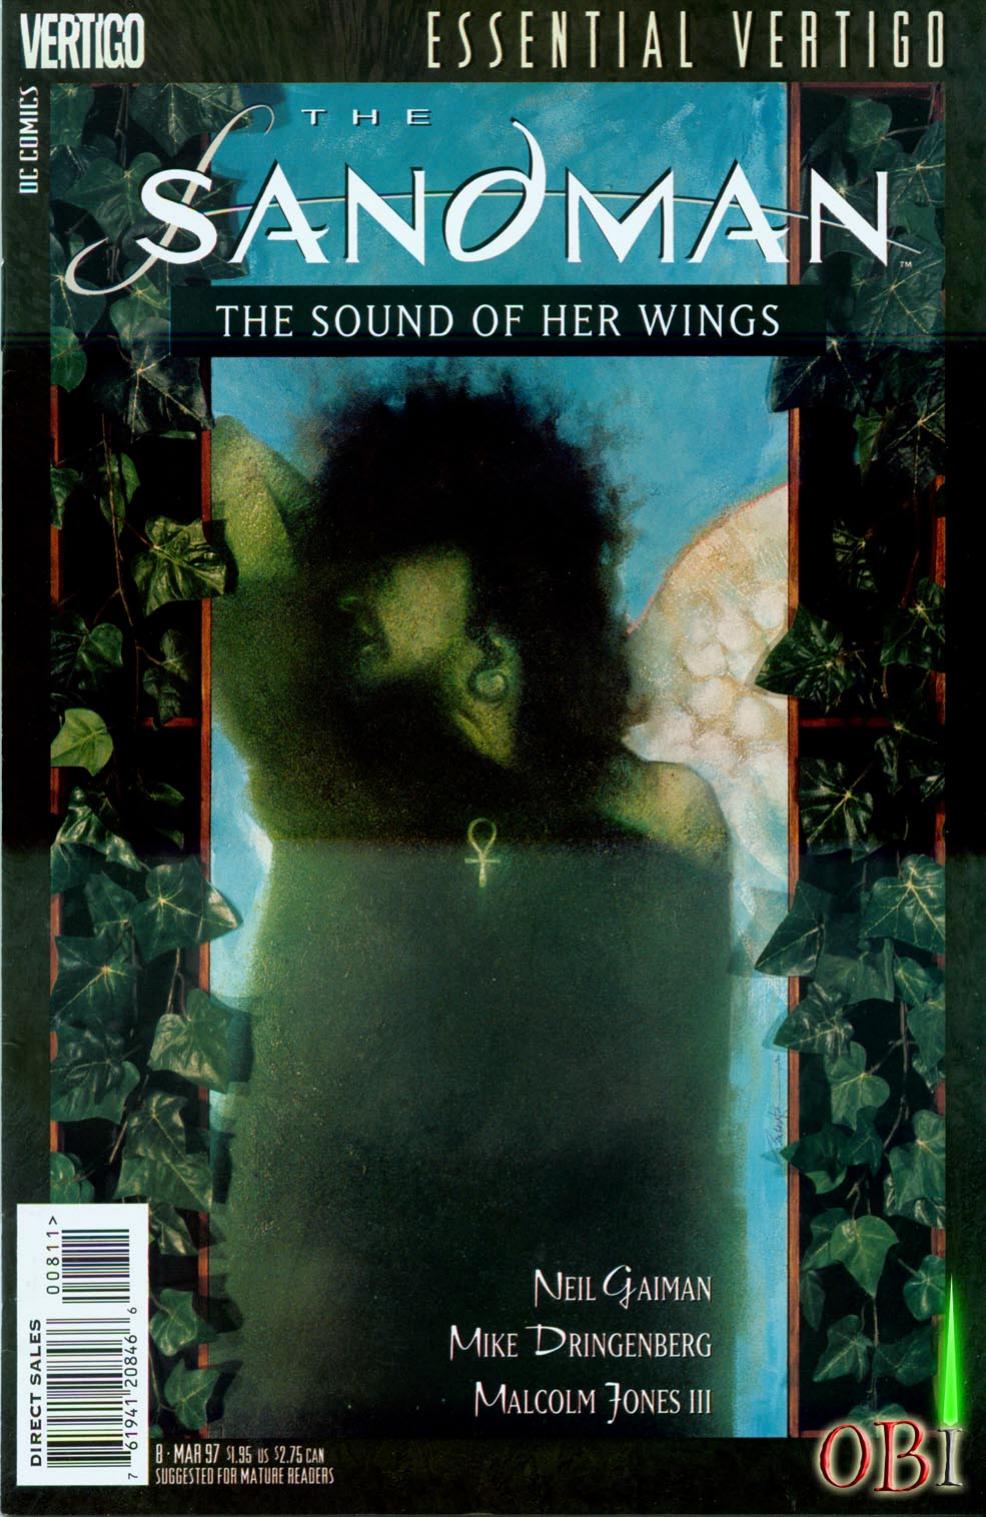 The Sandman #08 The Sound of Her Wings